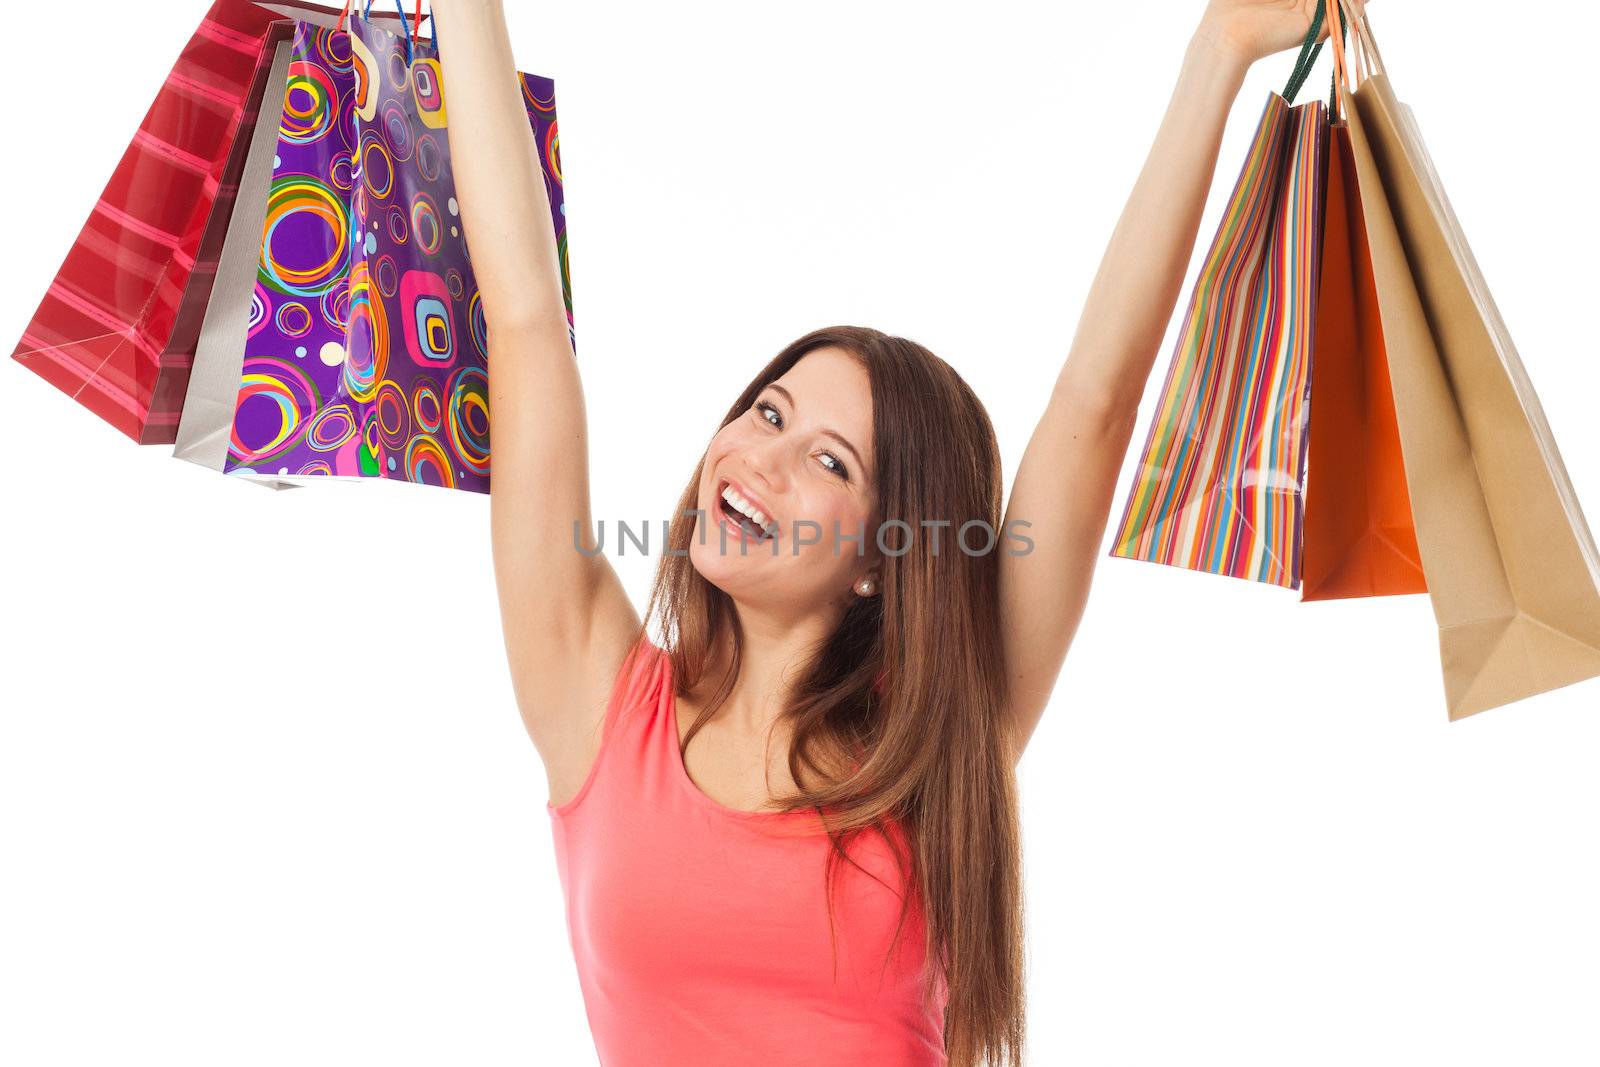 Pretty brunette holding shopping bags and looking very happy, isolated on white